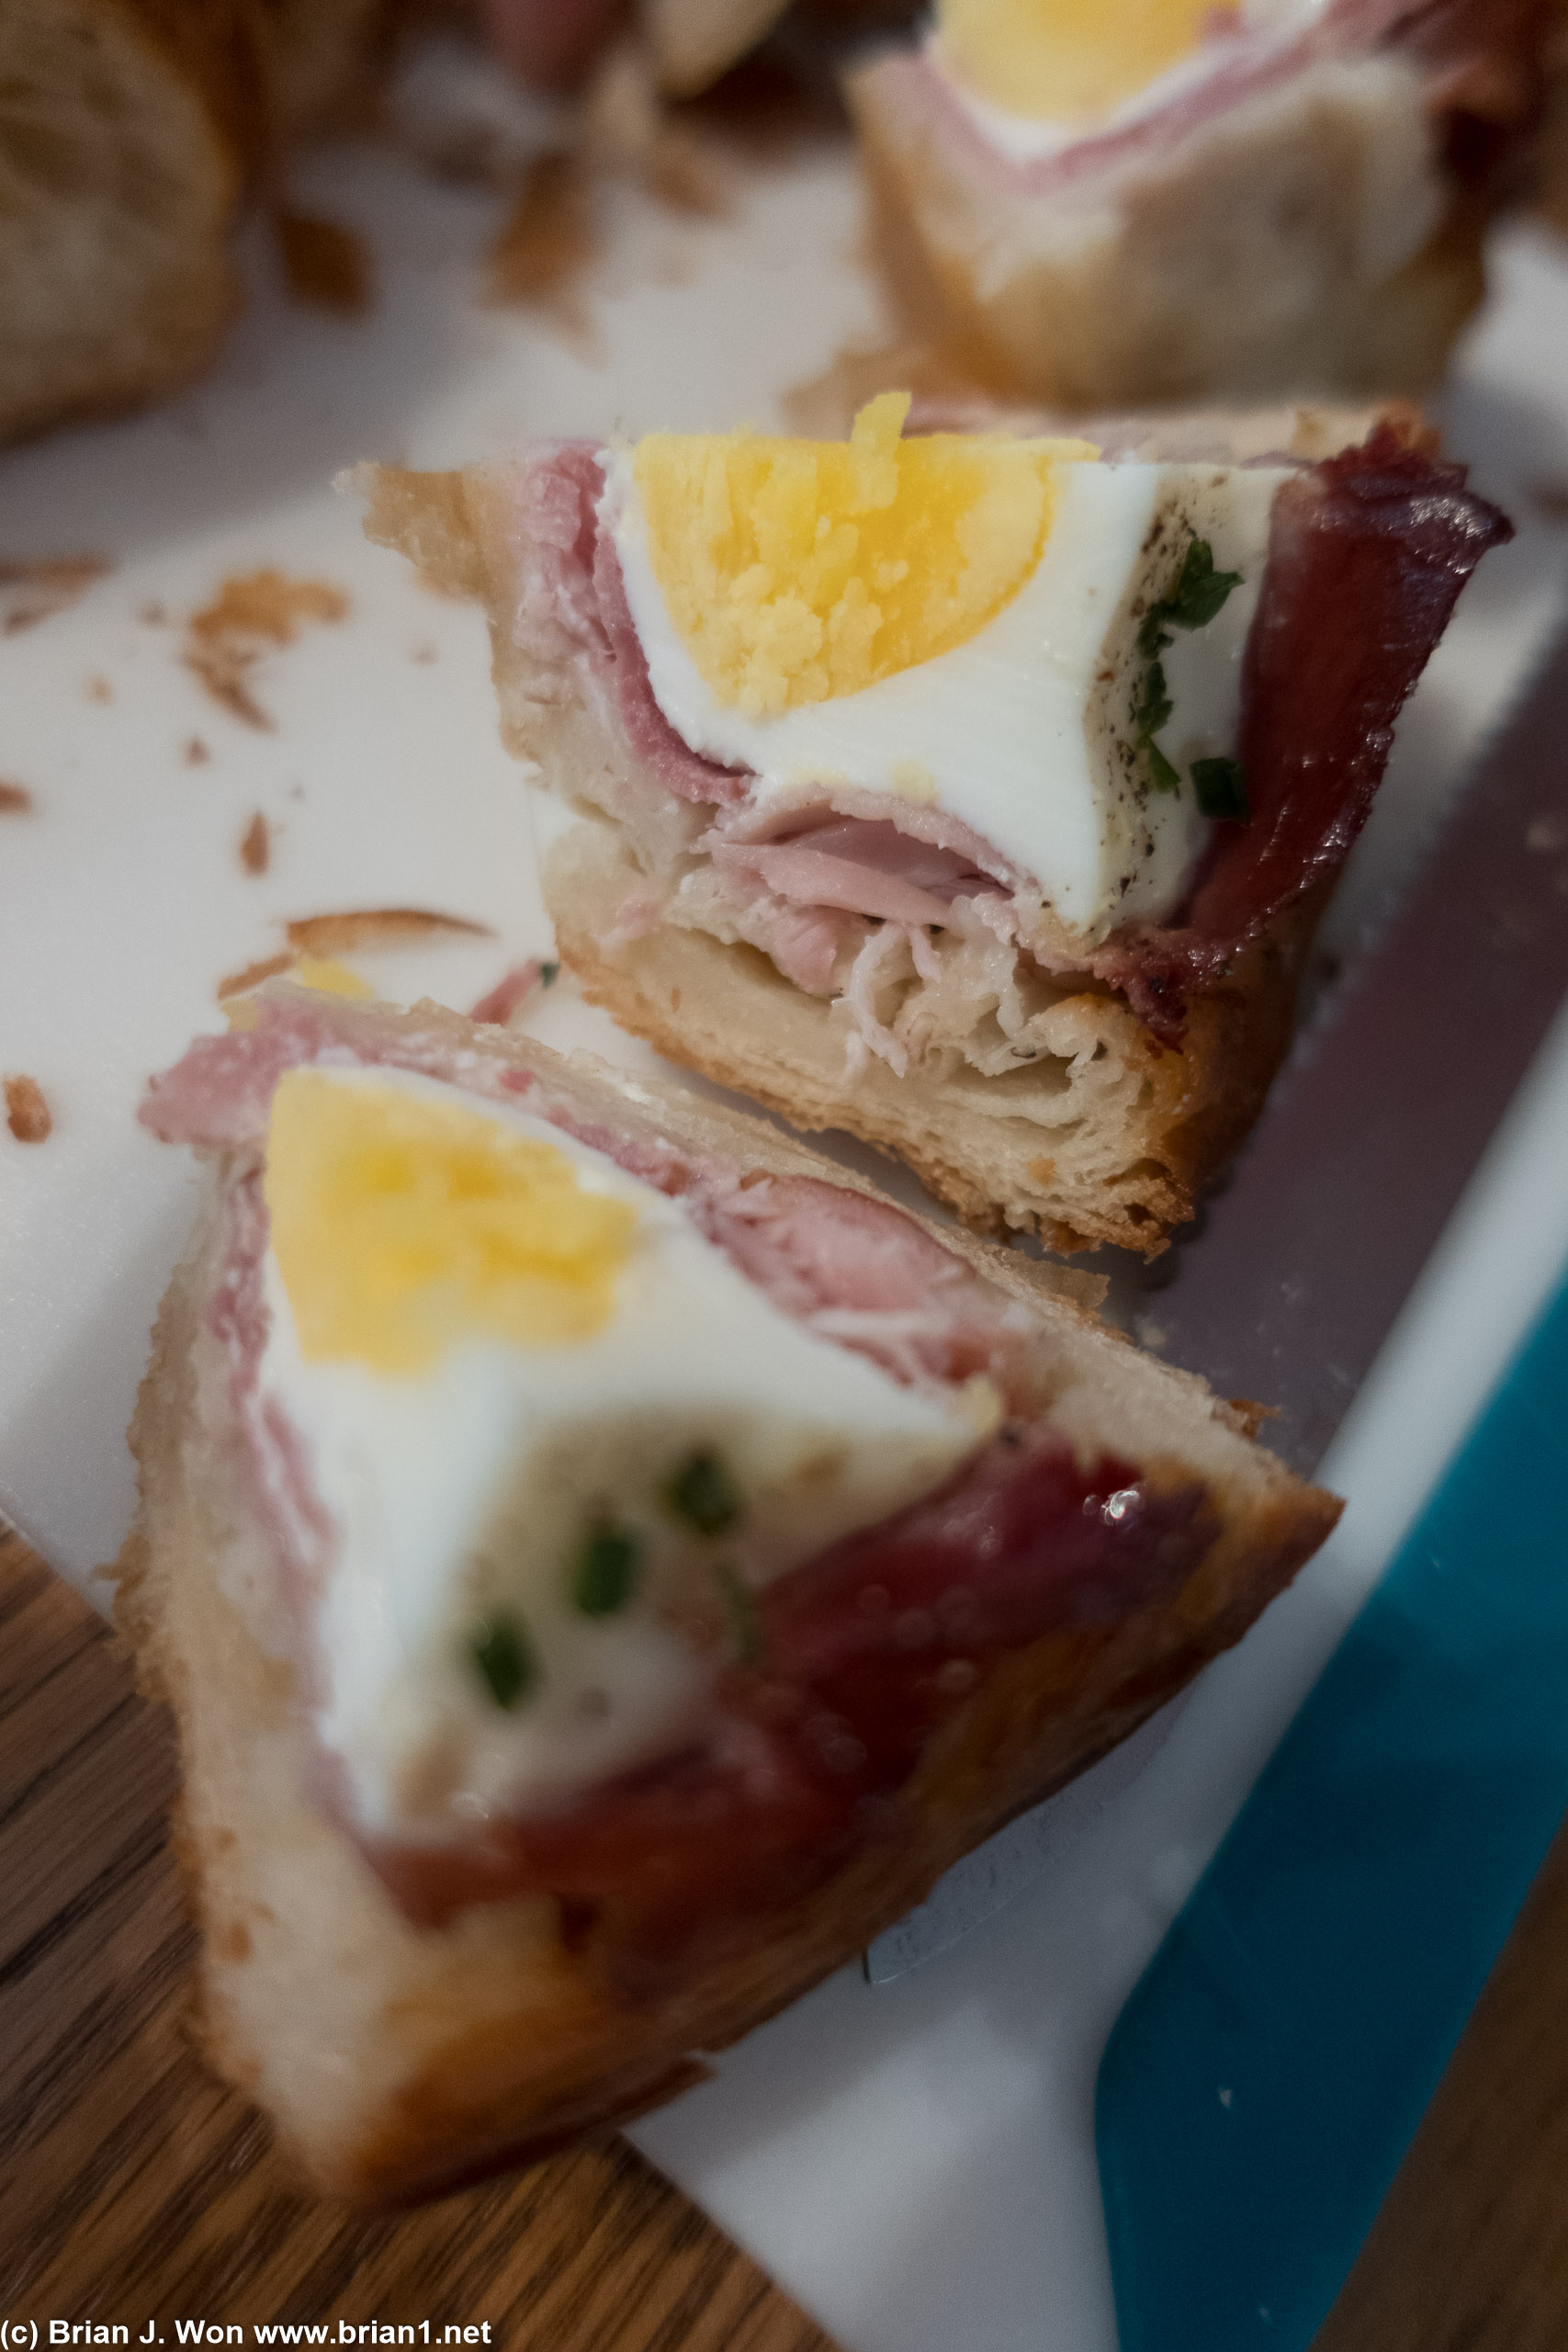 Ham and egg pastry from Moonbelly.